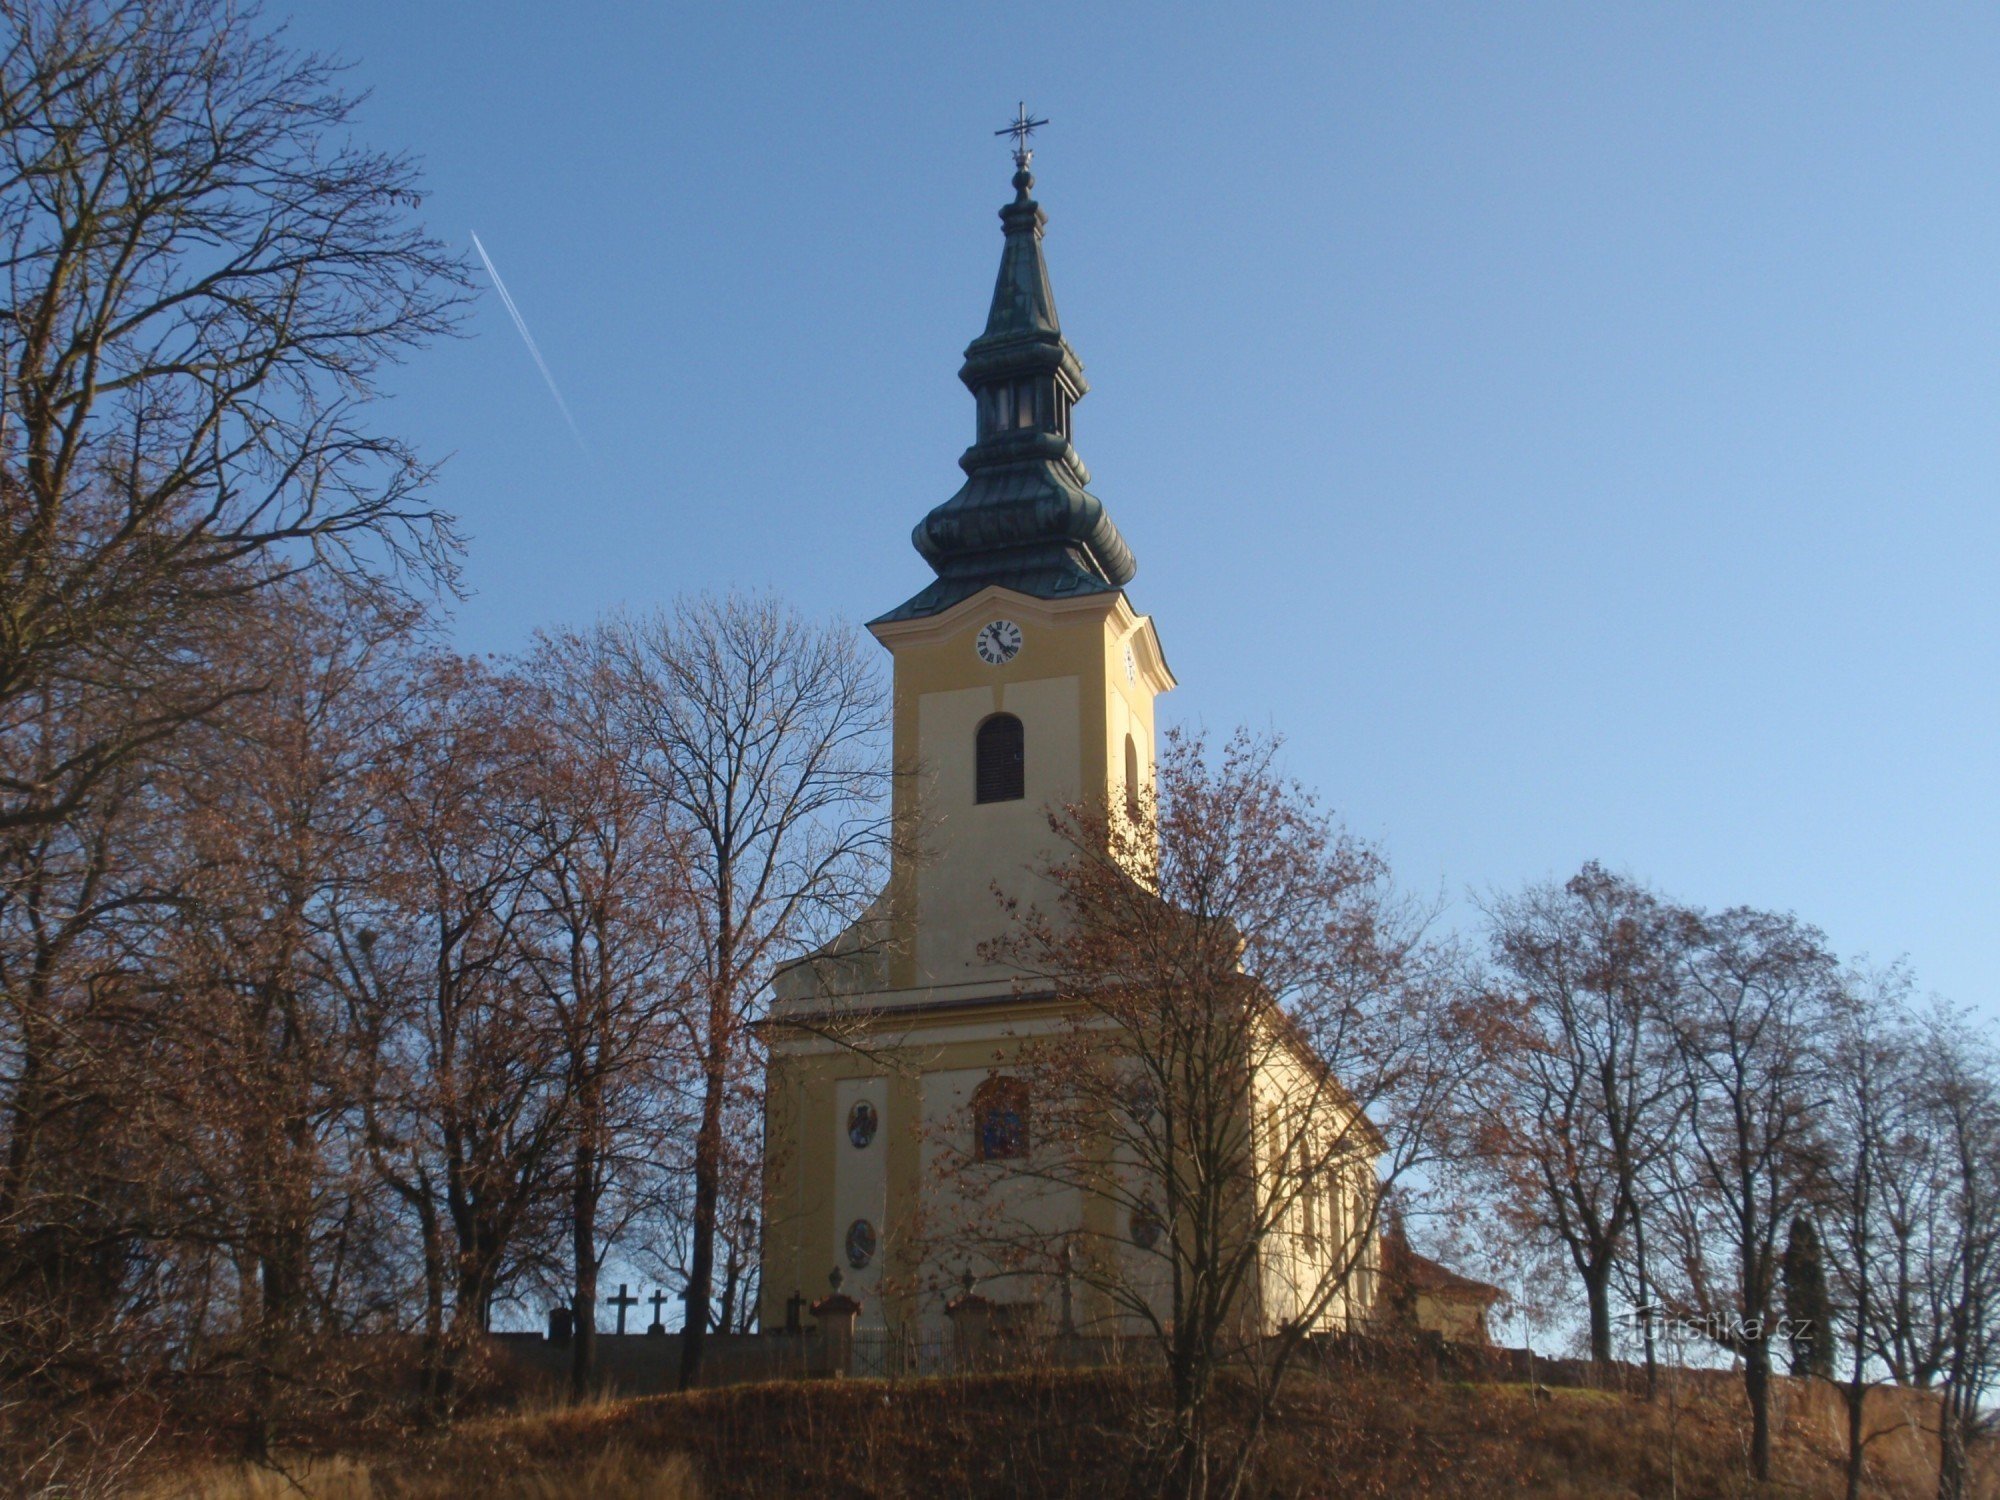 Church of the Assumption of the Virgin Mary in Troubsk